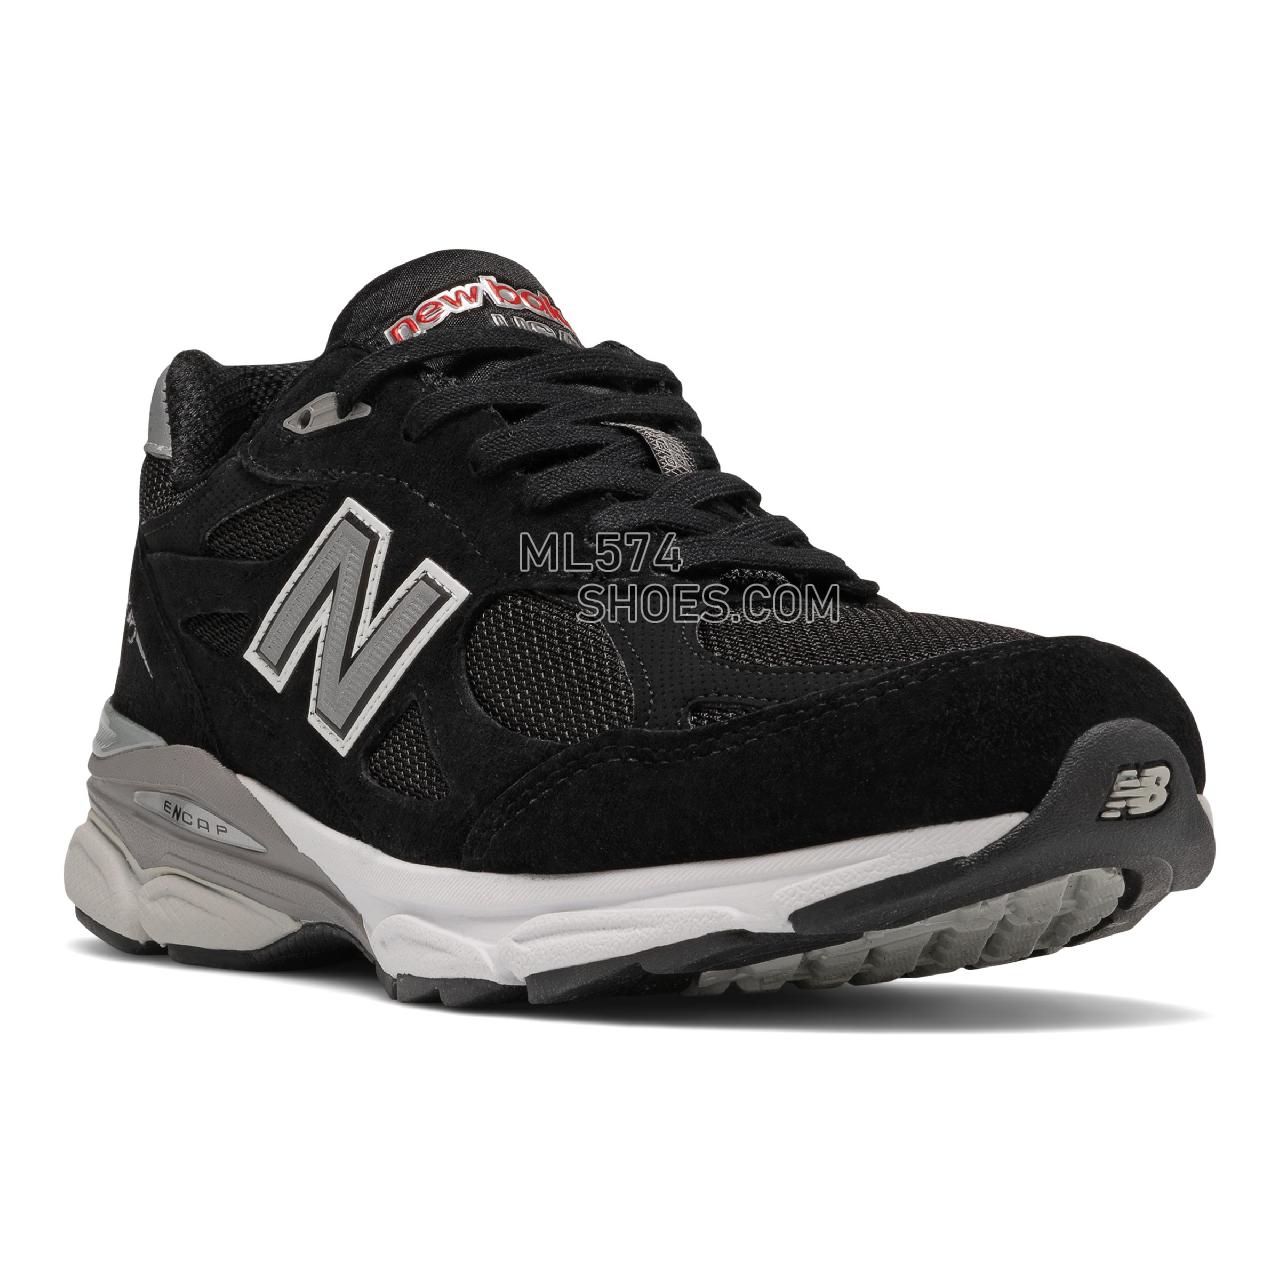 New Balance Made in USA 990v3 - Men's Made in USA And UK Sneakers - Black with White - M990BS3